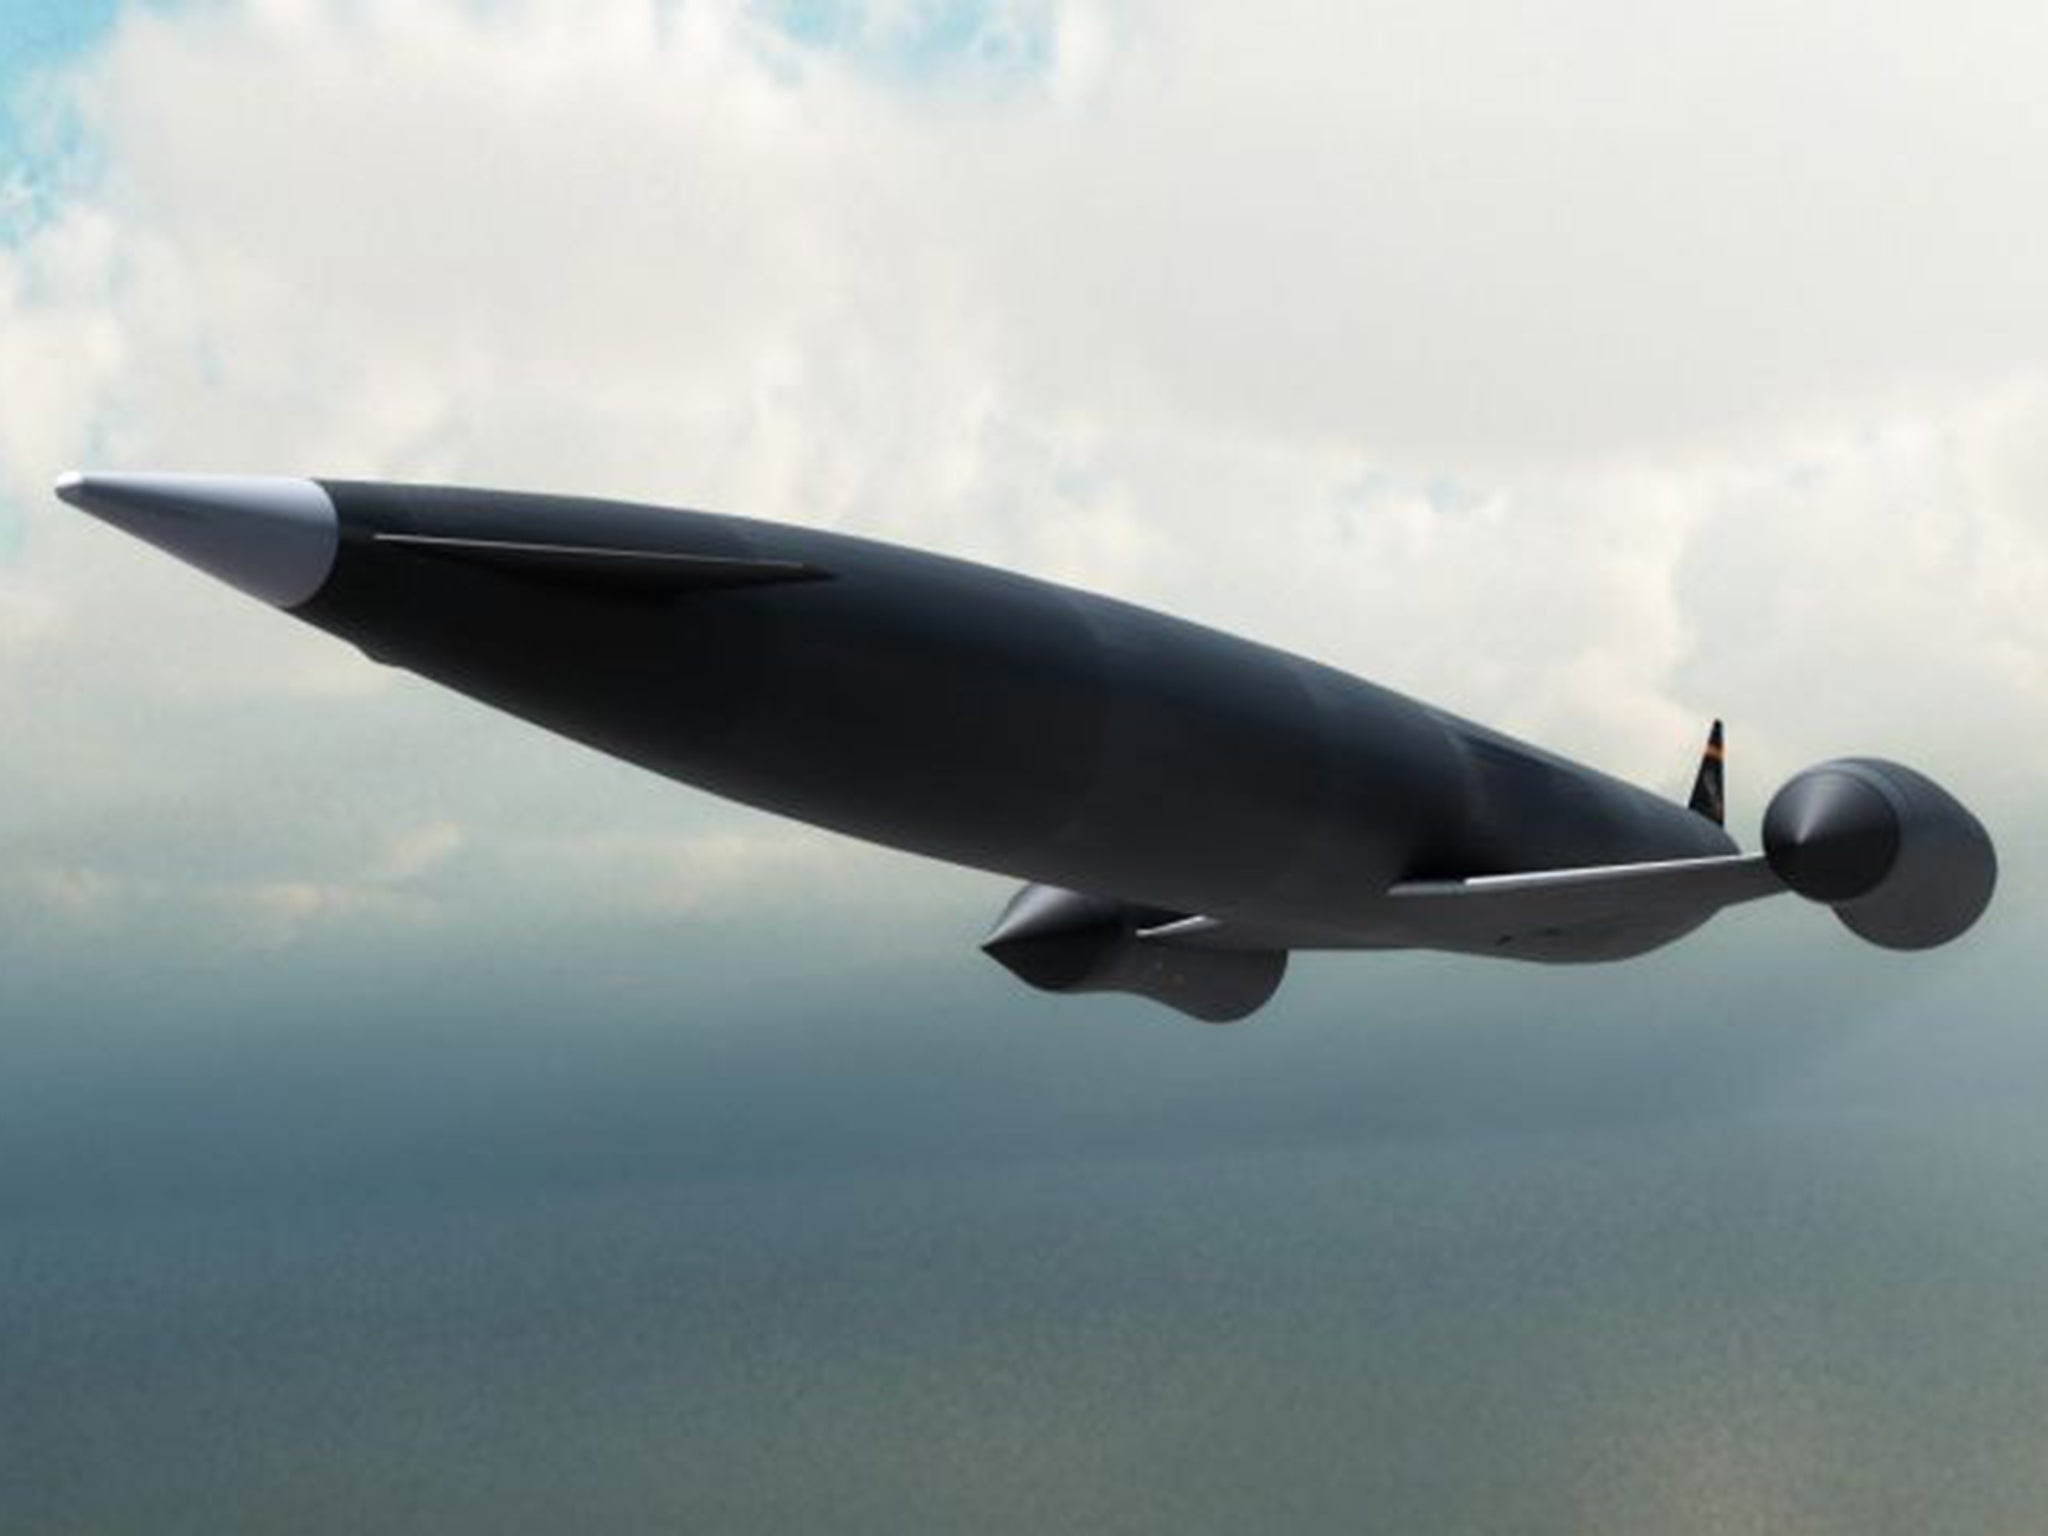 BAE is taking a 20 per cent stake in Reaction Engines, which is developing a rocket engine to power its space plane, called Skylon